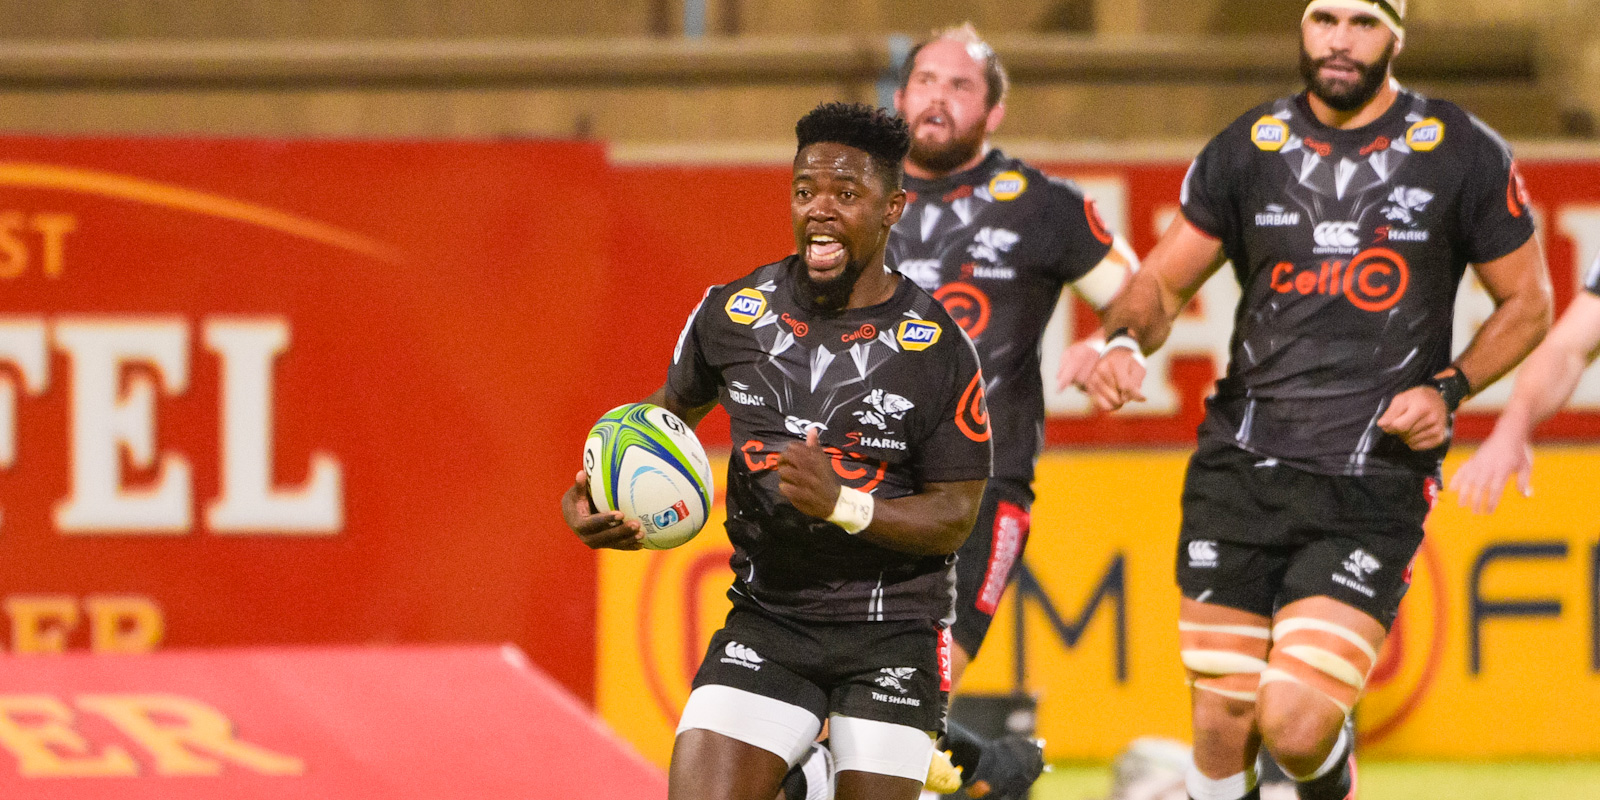 Sanele Nohamba scored one of the Cell C Sharks' four tries.